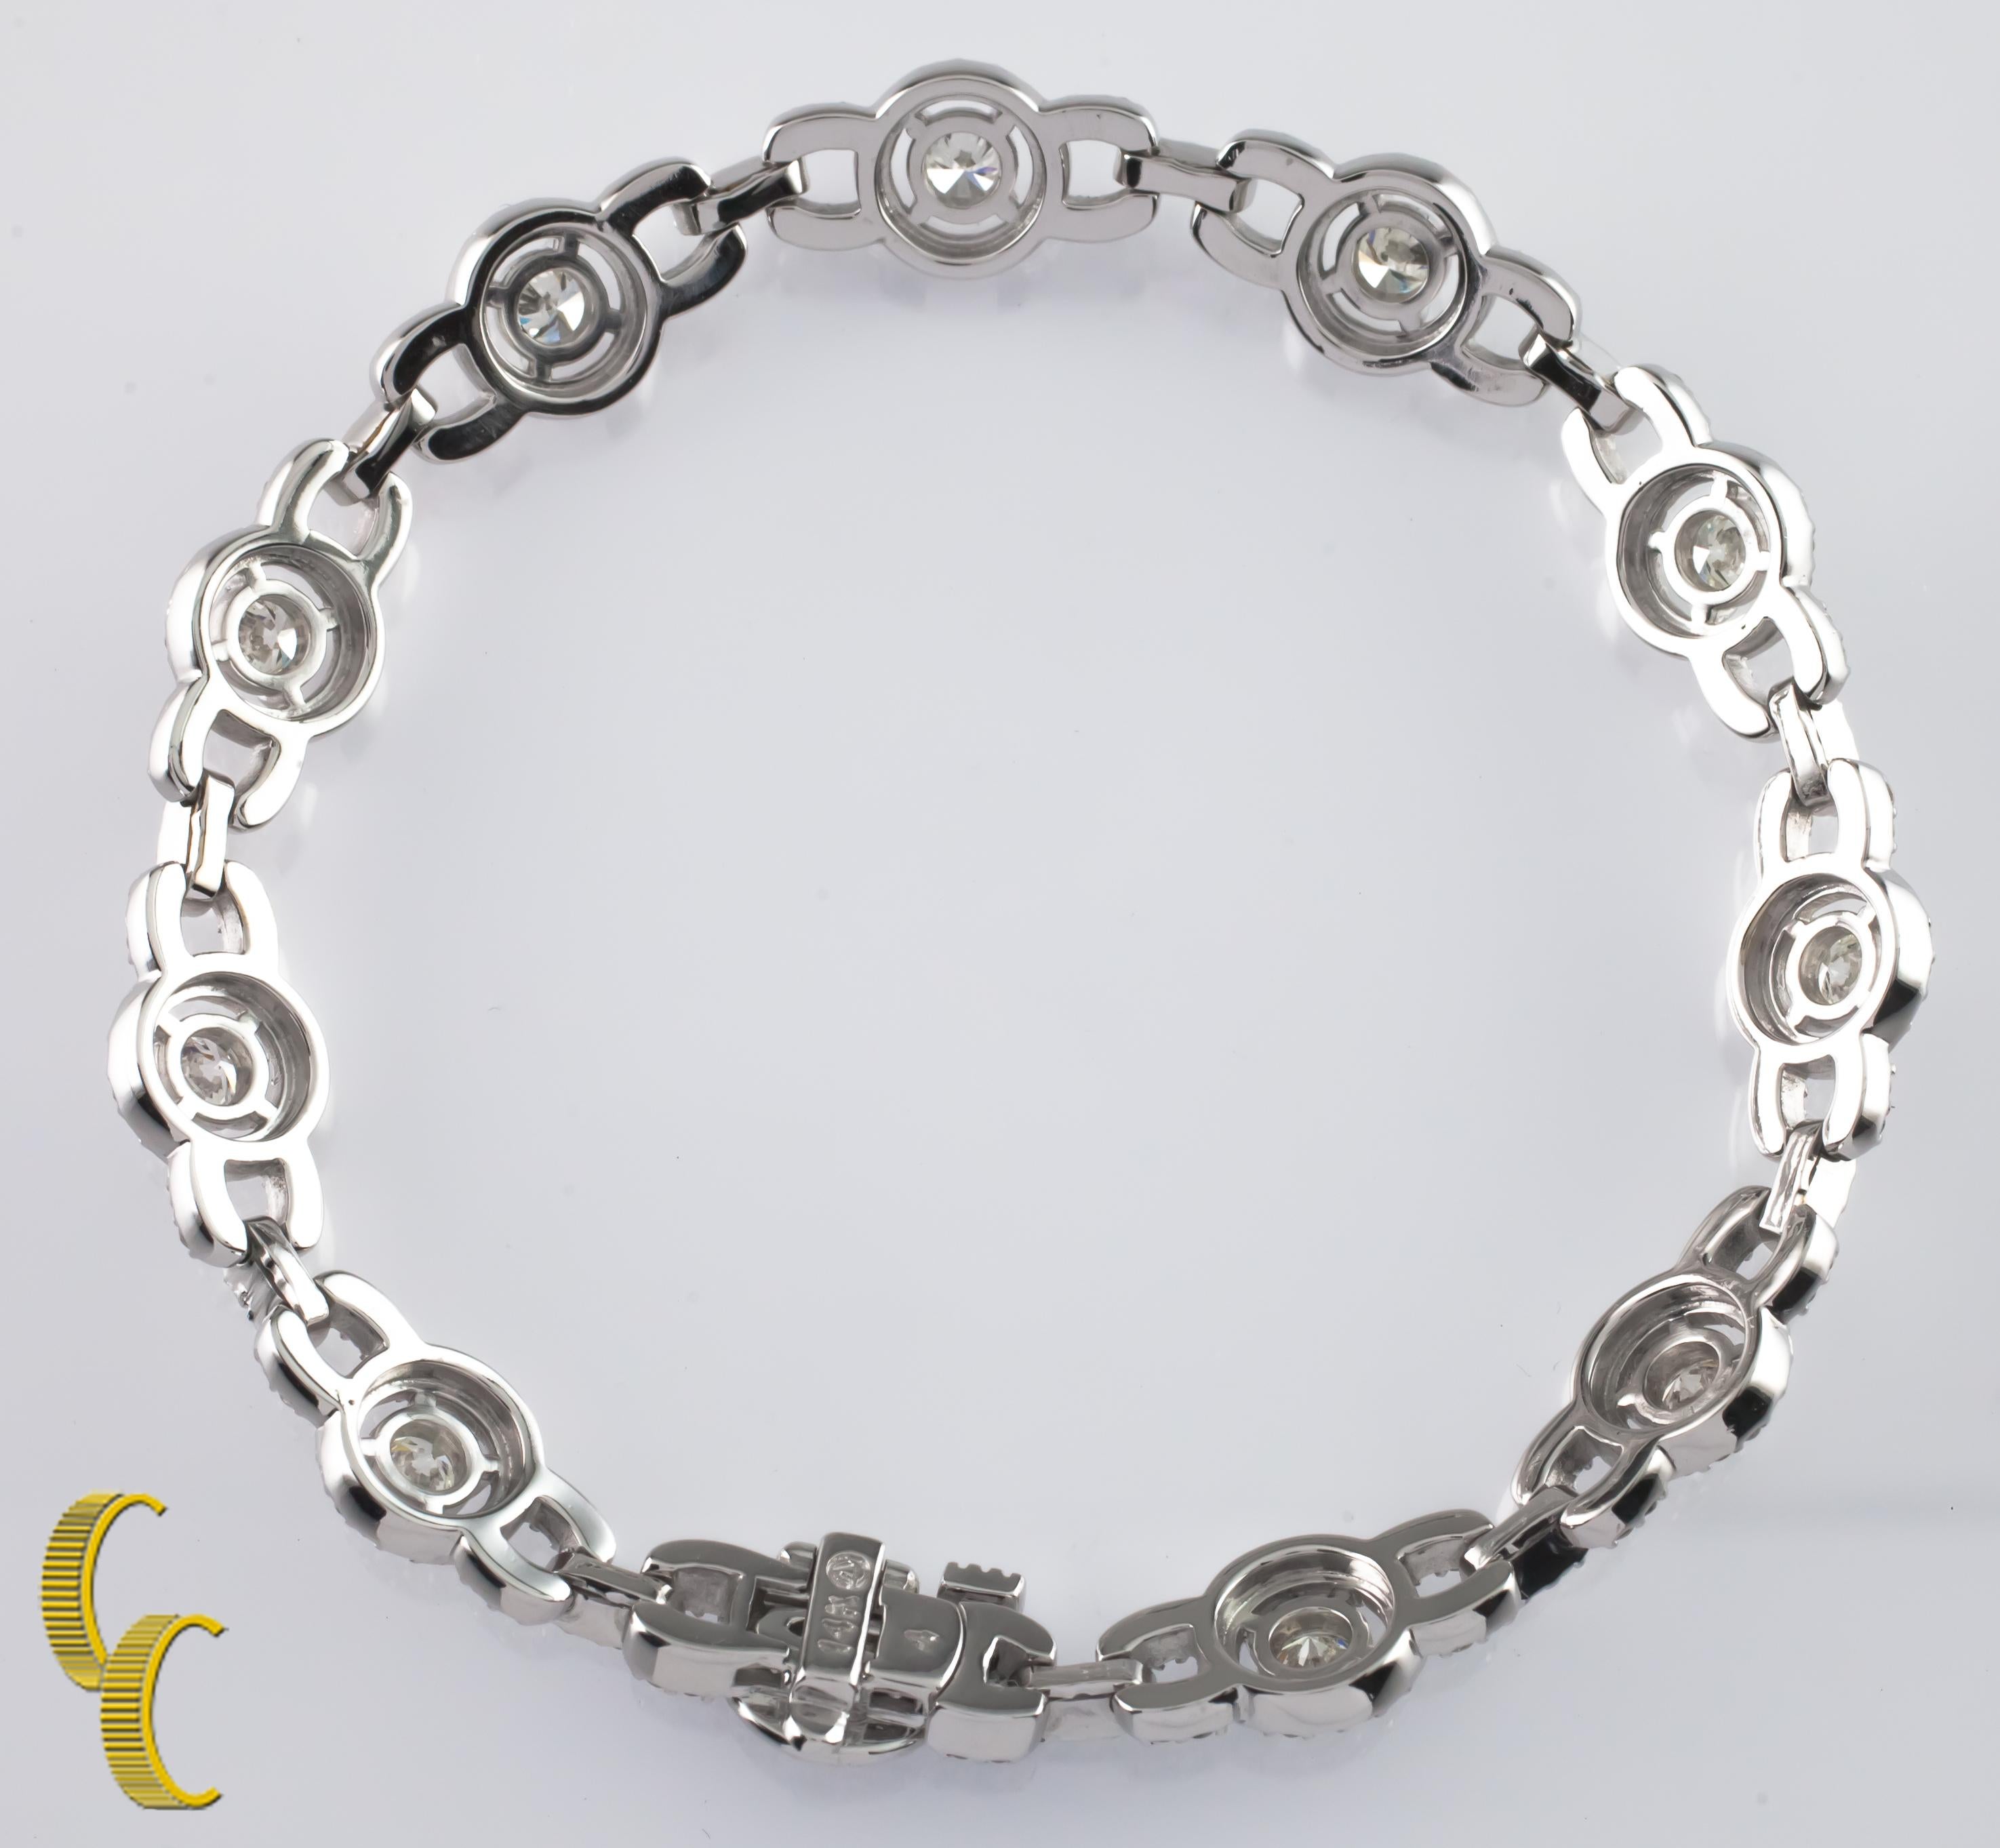 Gorgeous, Unique Diamond Tennis Bracelet!
14k White Gold Setting
Features Solitaire Round Diamonds in Halo Settings w/ Diamond-Studded Links
Total Diamond Weight = Approximately 6.5 ct
Average Color = I - J
Average Clarity = SI
Total Length = 7